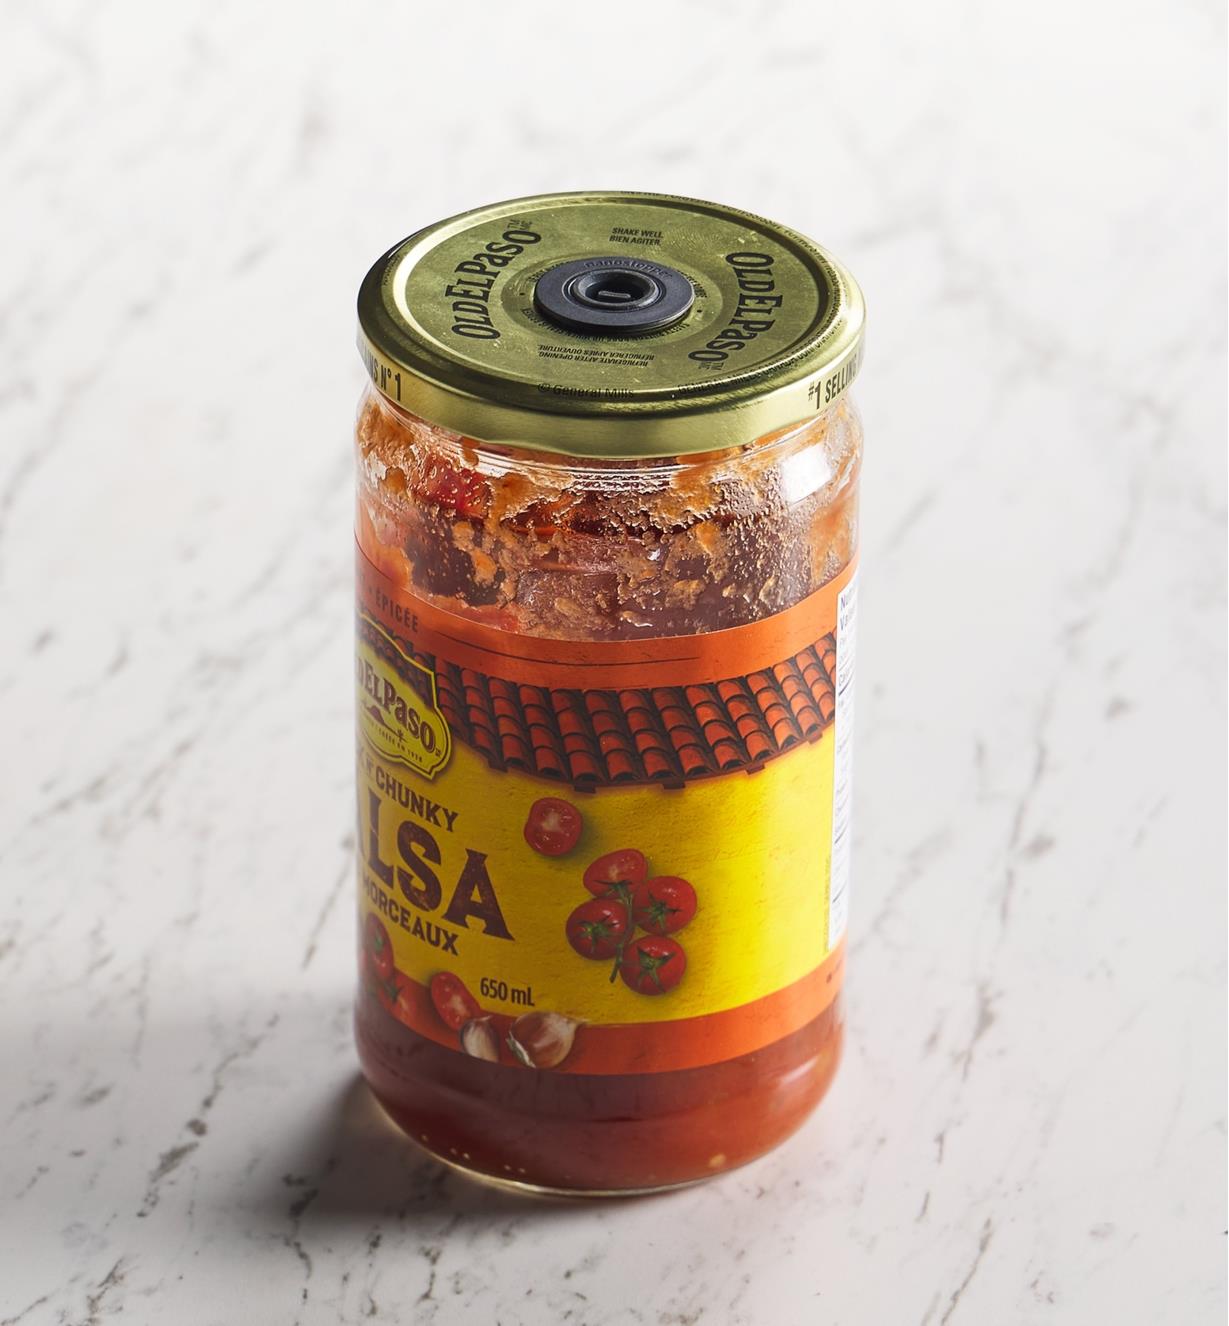 A jar of salsa with an Airtender stopper valve set in the lid